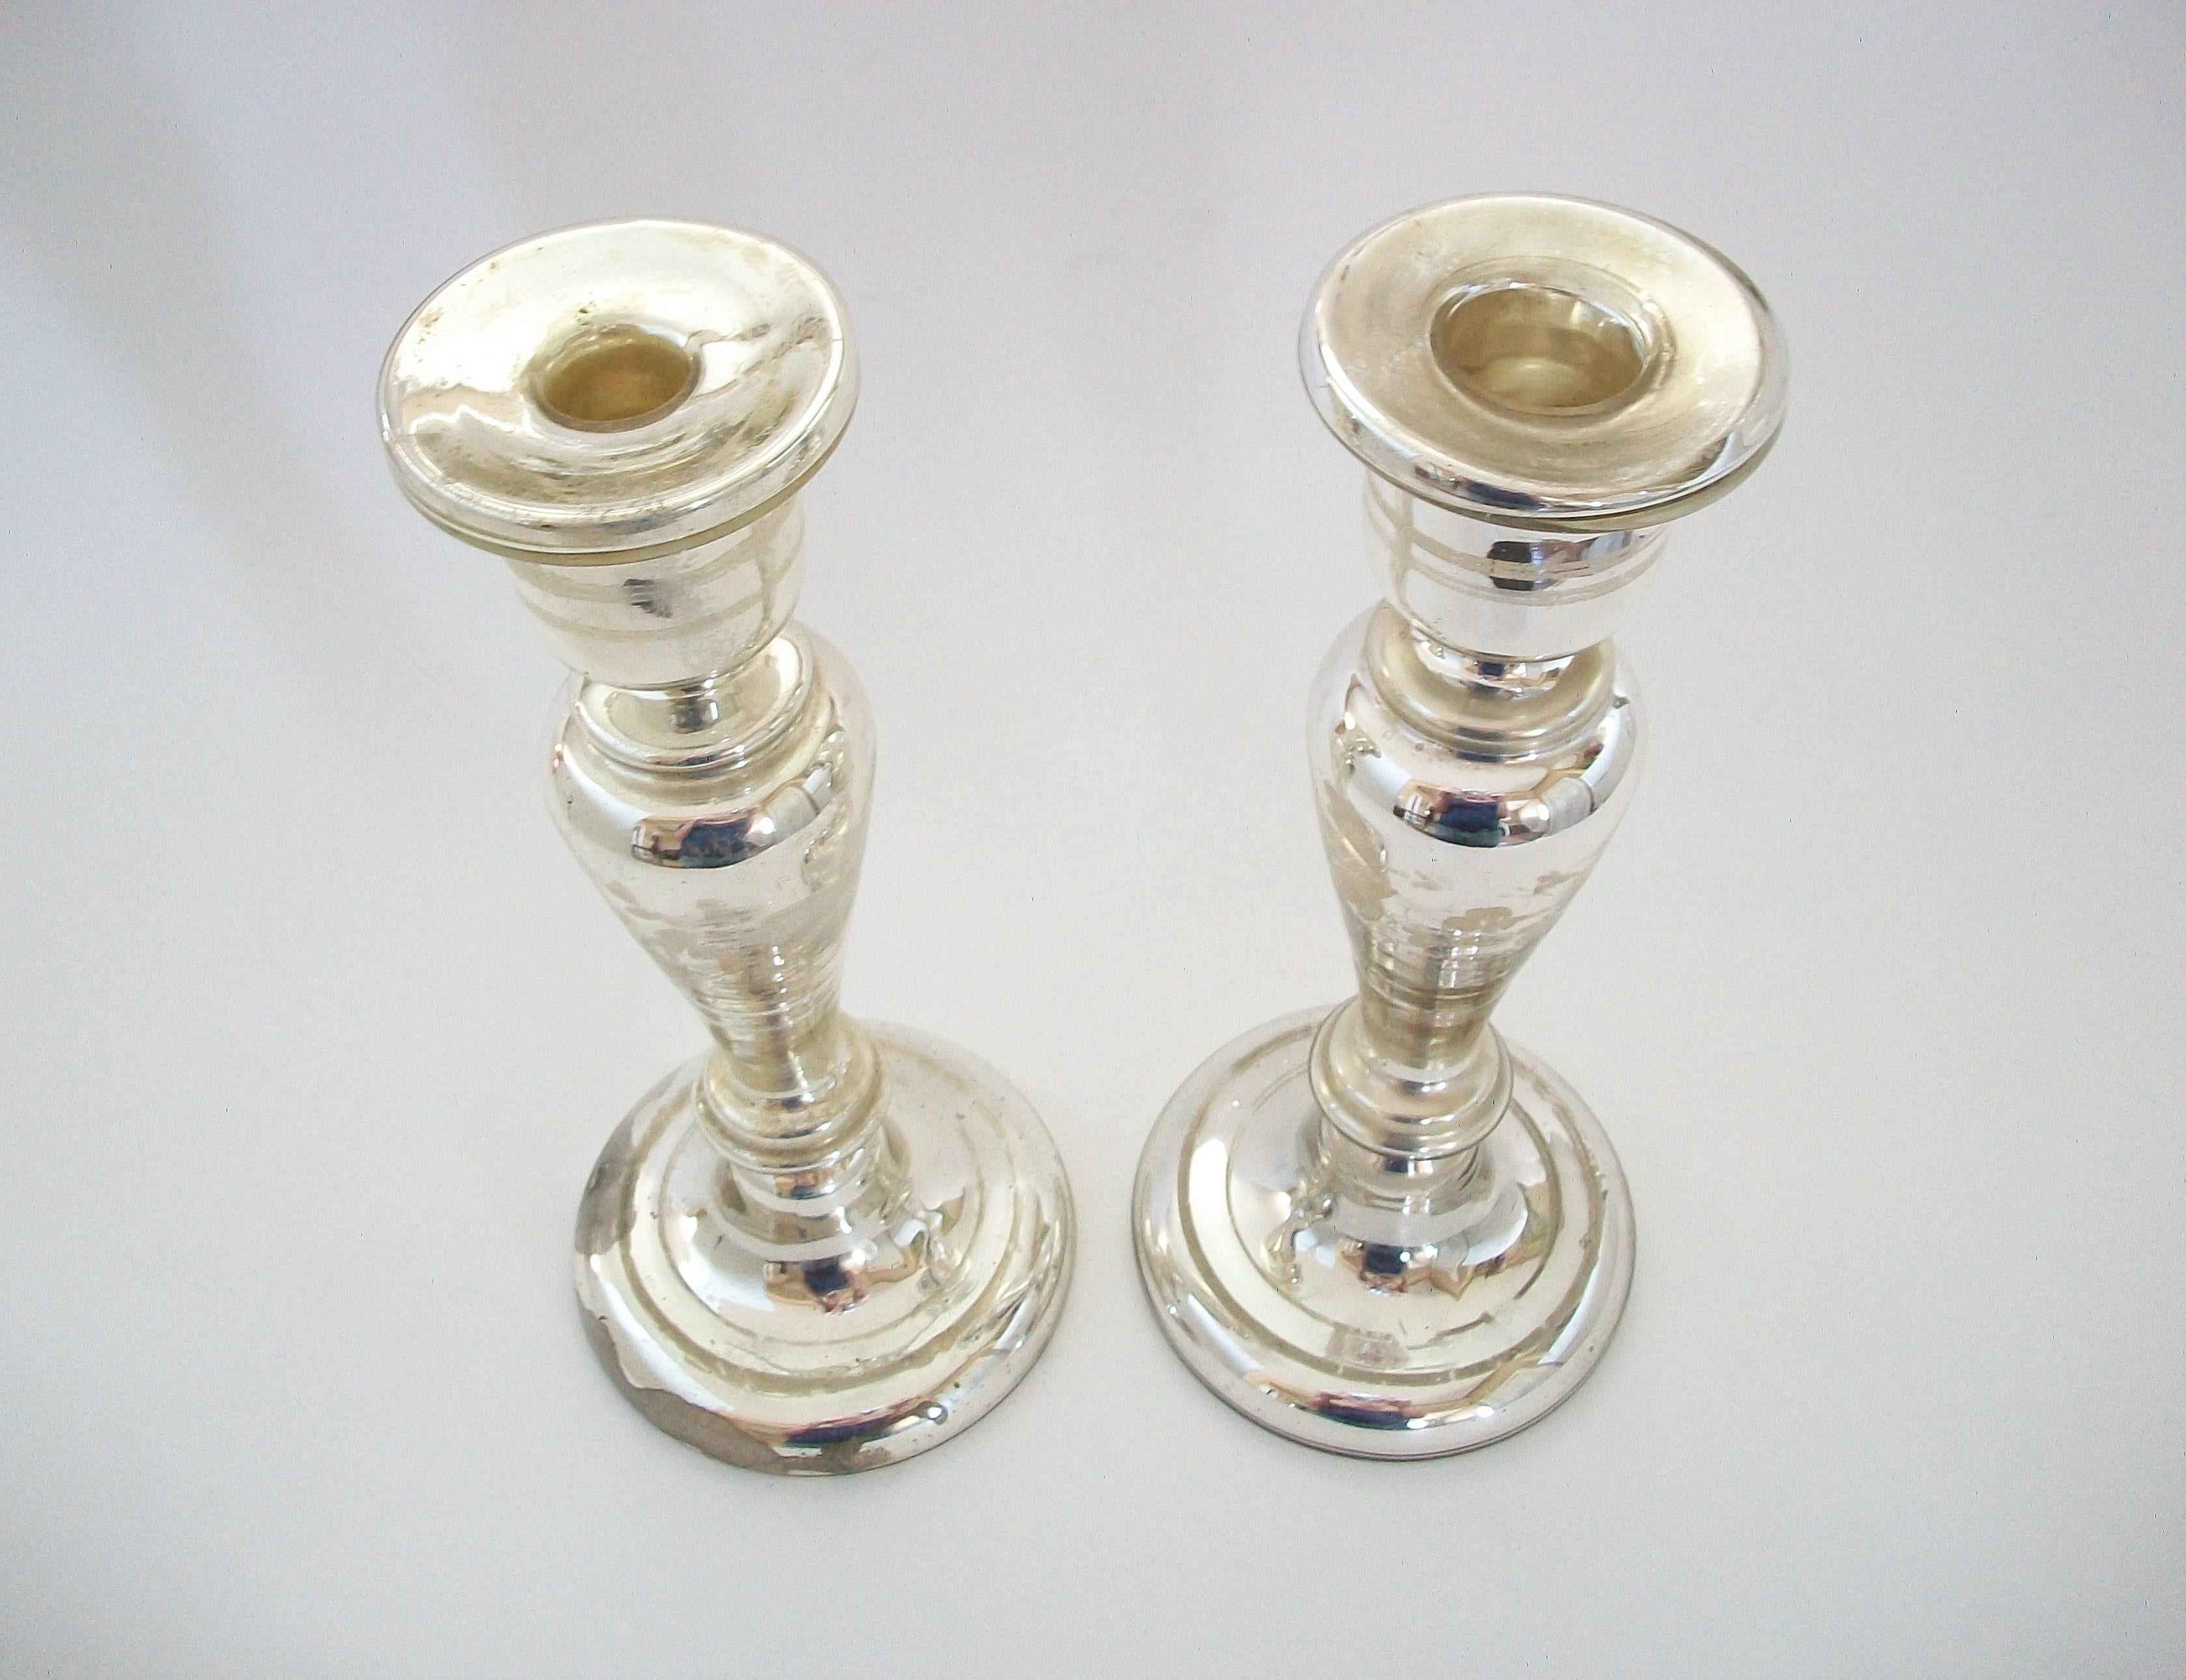 Antique Pair of White Painted Mercury Glass Candlesticks - France - Circa 1880 In Good Condition For Sale In Chatham, ON